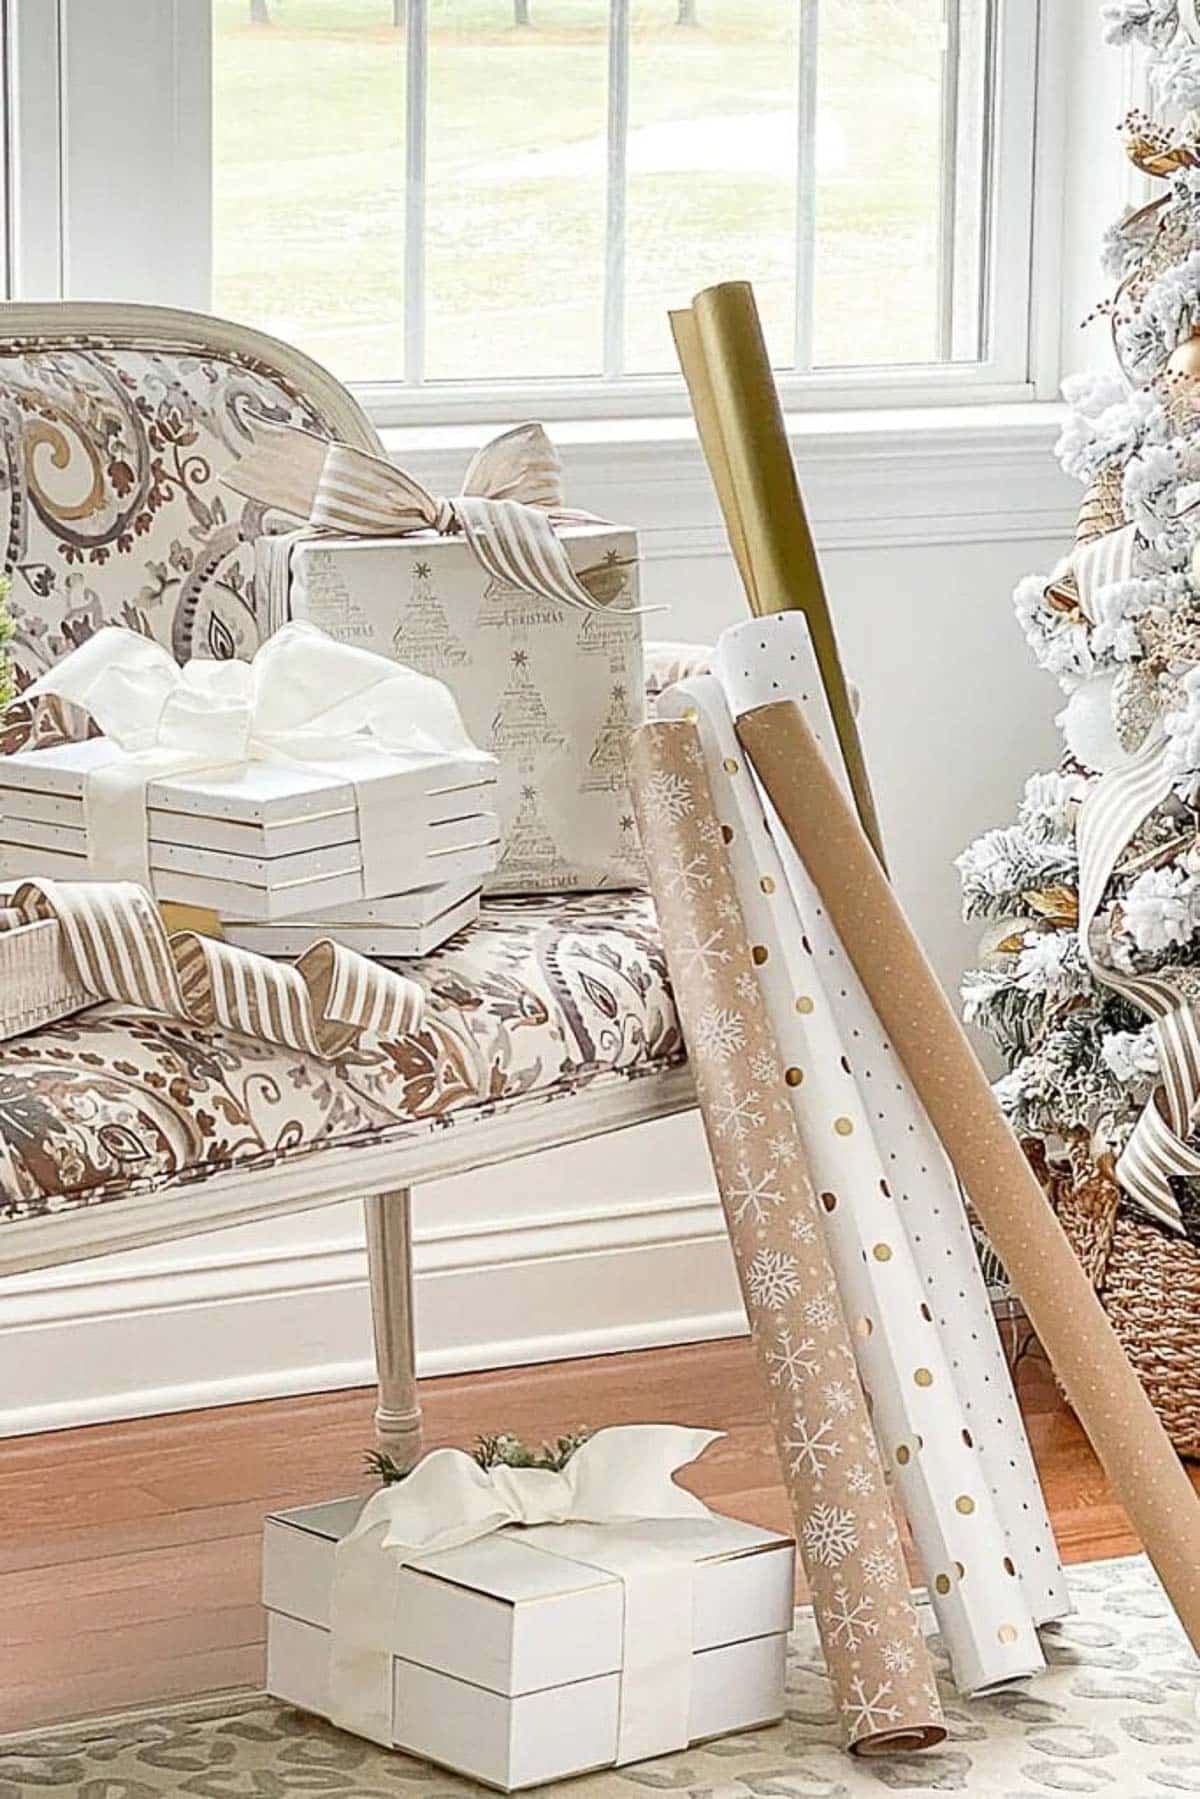 Decorating For Christmas: Where To Start, What To Do